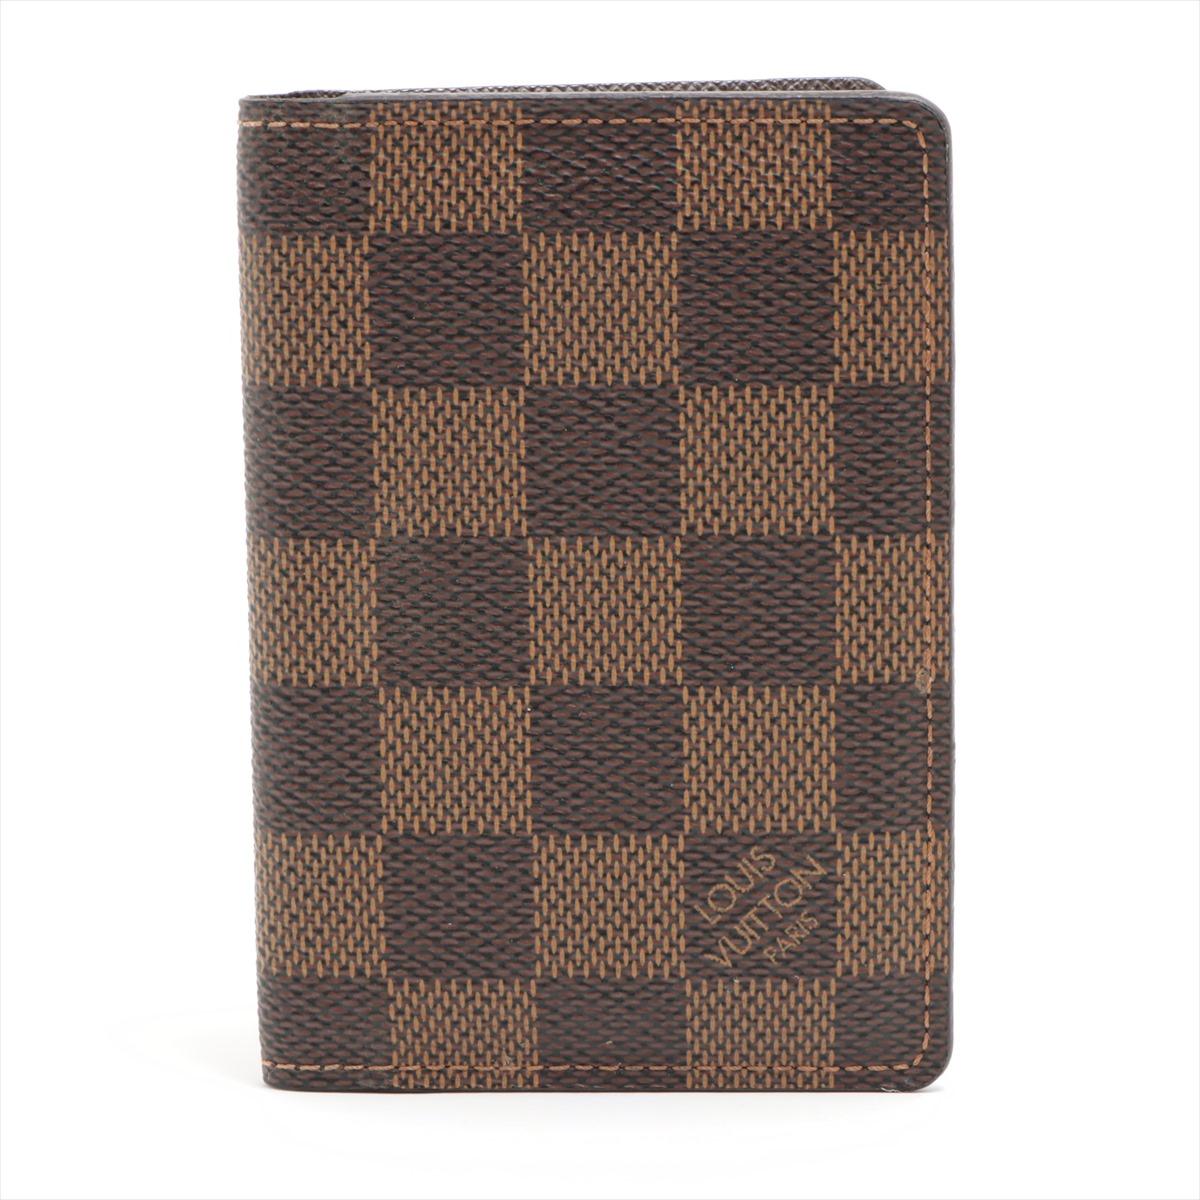 The Louis Vuitton Damier Ebene Pocket Organizer is a compact and stylish accessory designed for optimal organization. Crafted from the iconic Damier Ebene canvas, the organizer exudes timeless sophistication. The exterior features a subtle